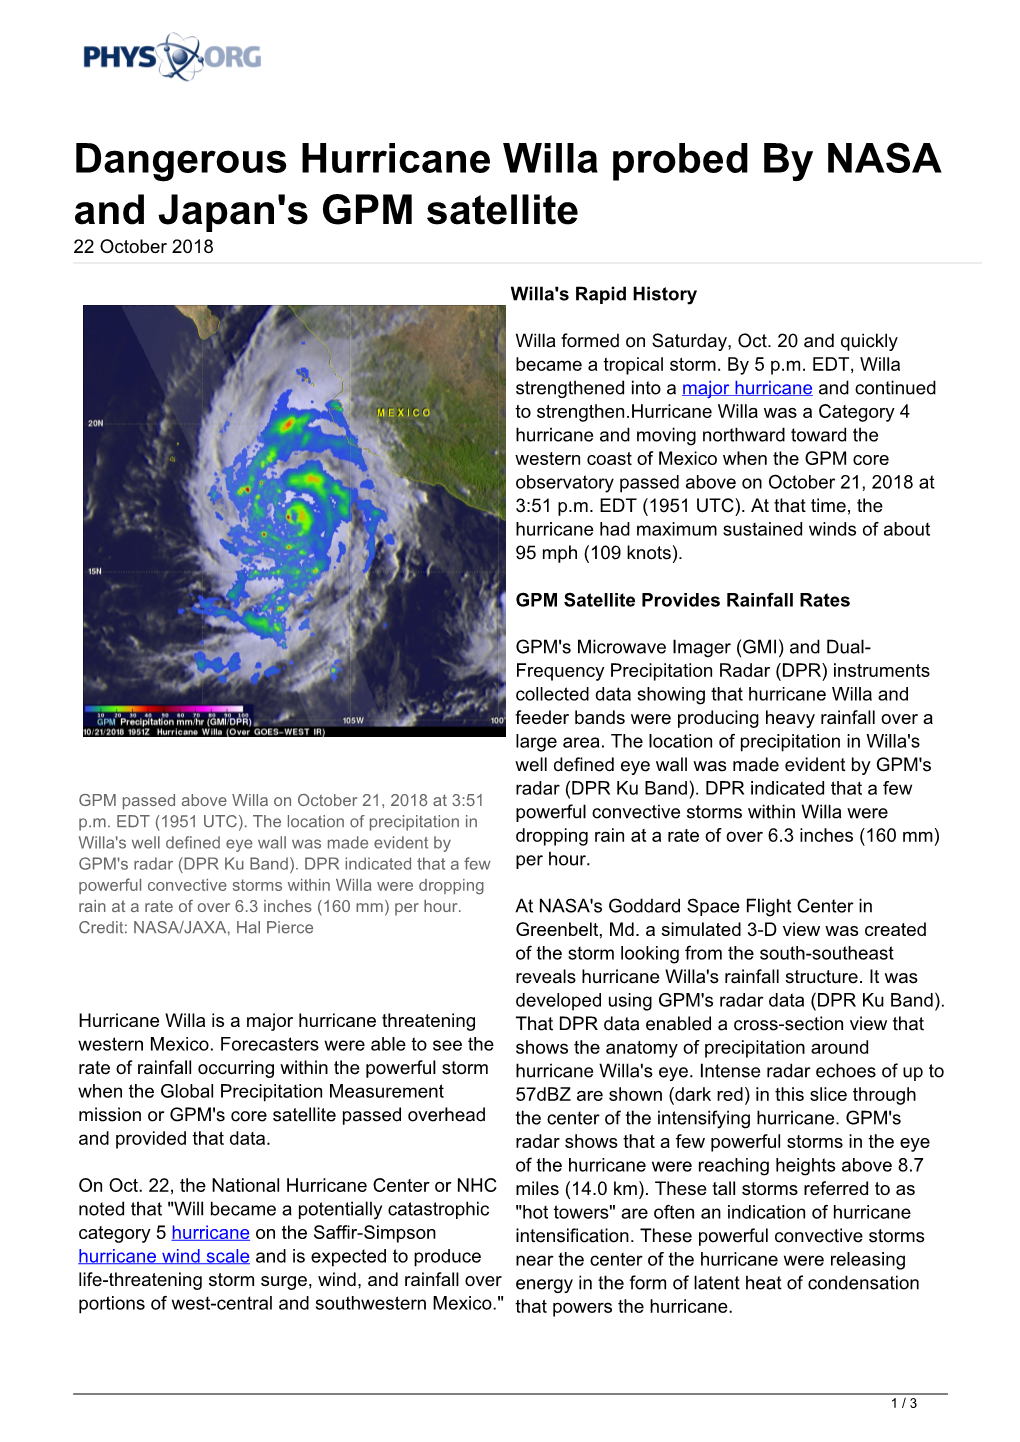 Dangerous Hurricane Willa Probed by NASA and Japan's GPM Satellite 22 October 2018